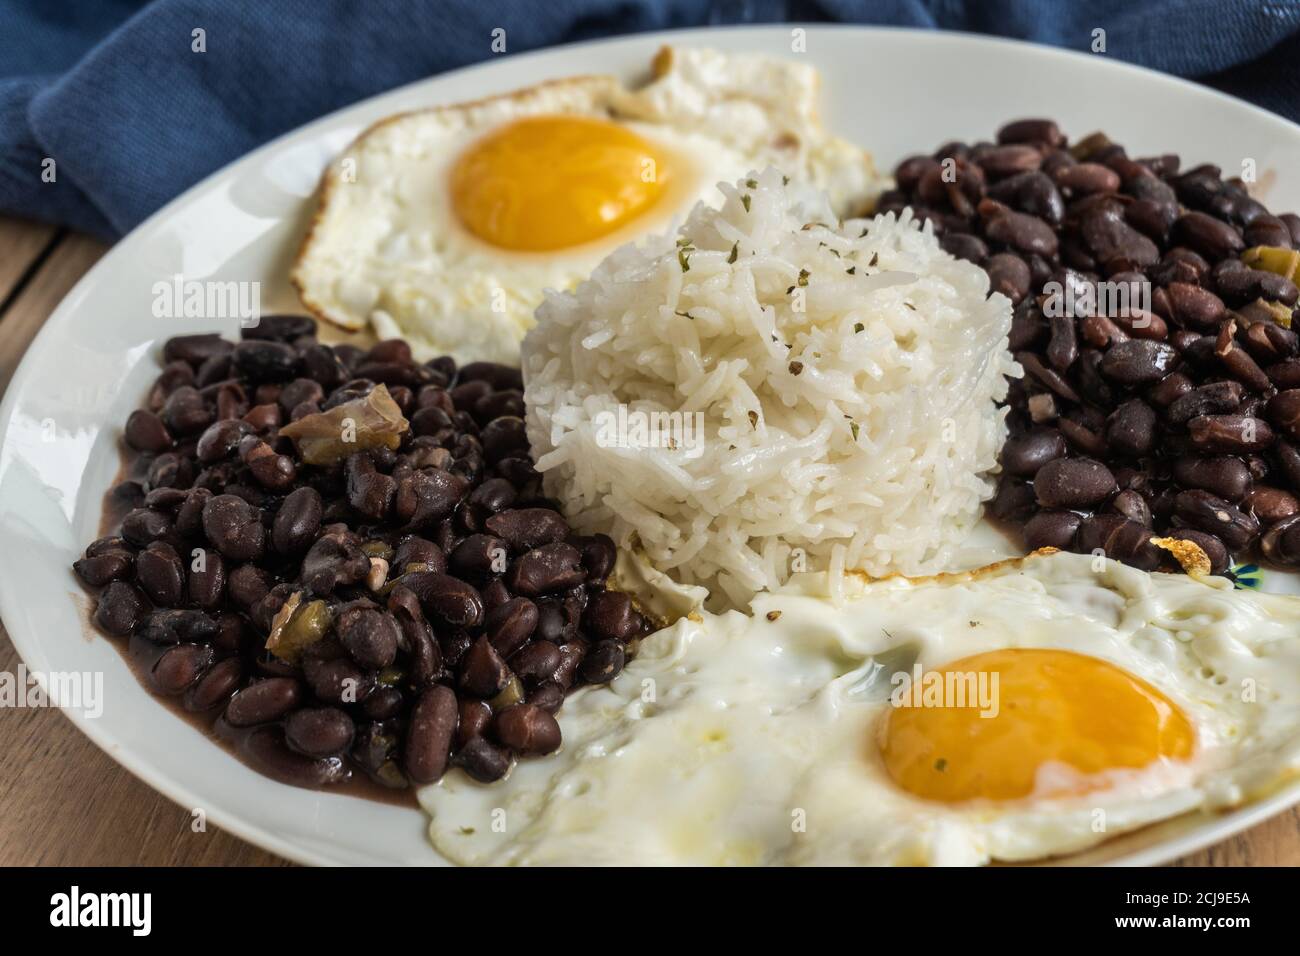 Dish of traditional Cuban cuisine with black beans, rice, and eggs Stock Photo